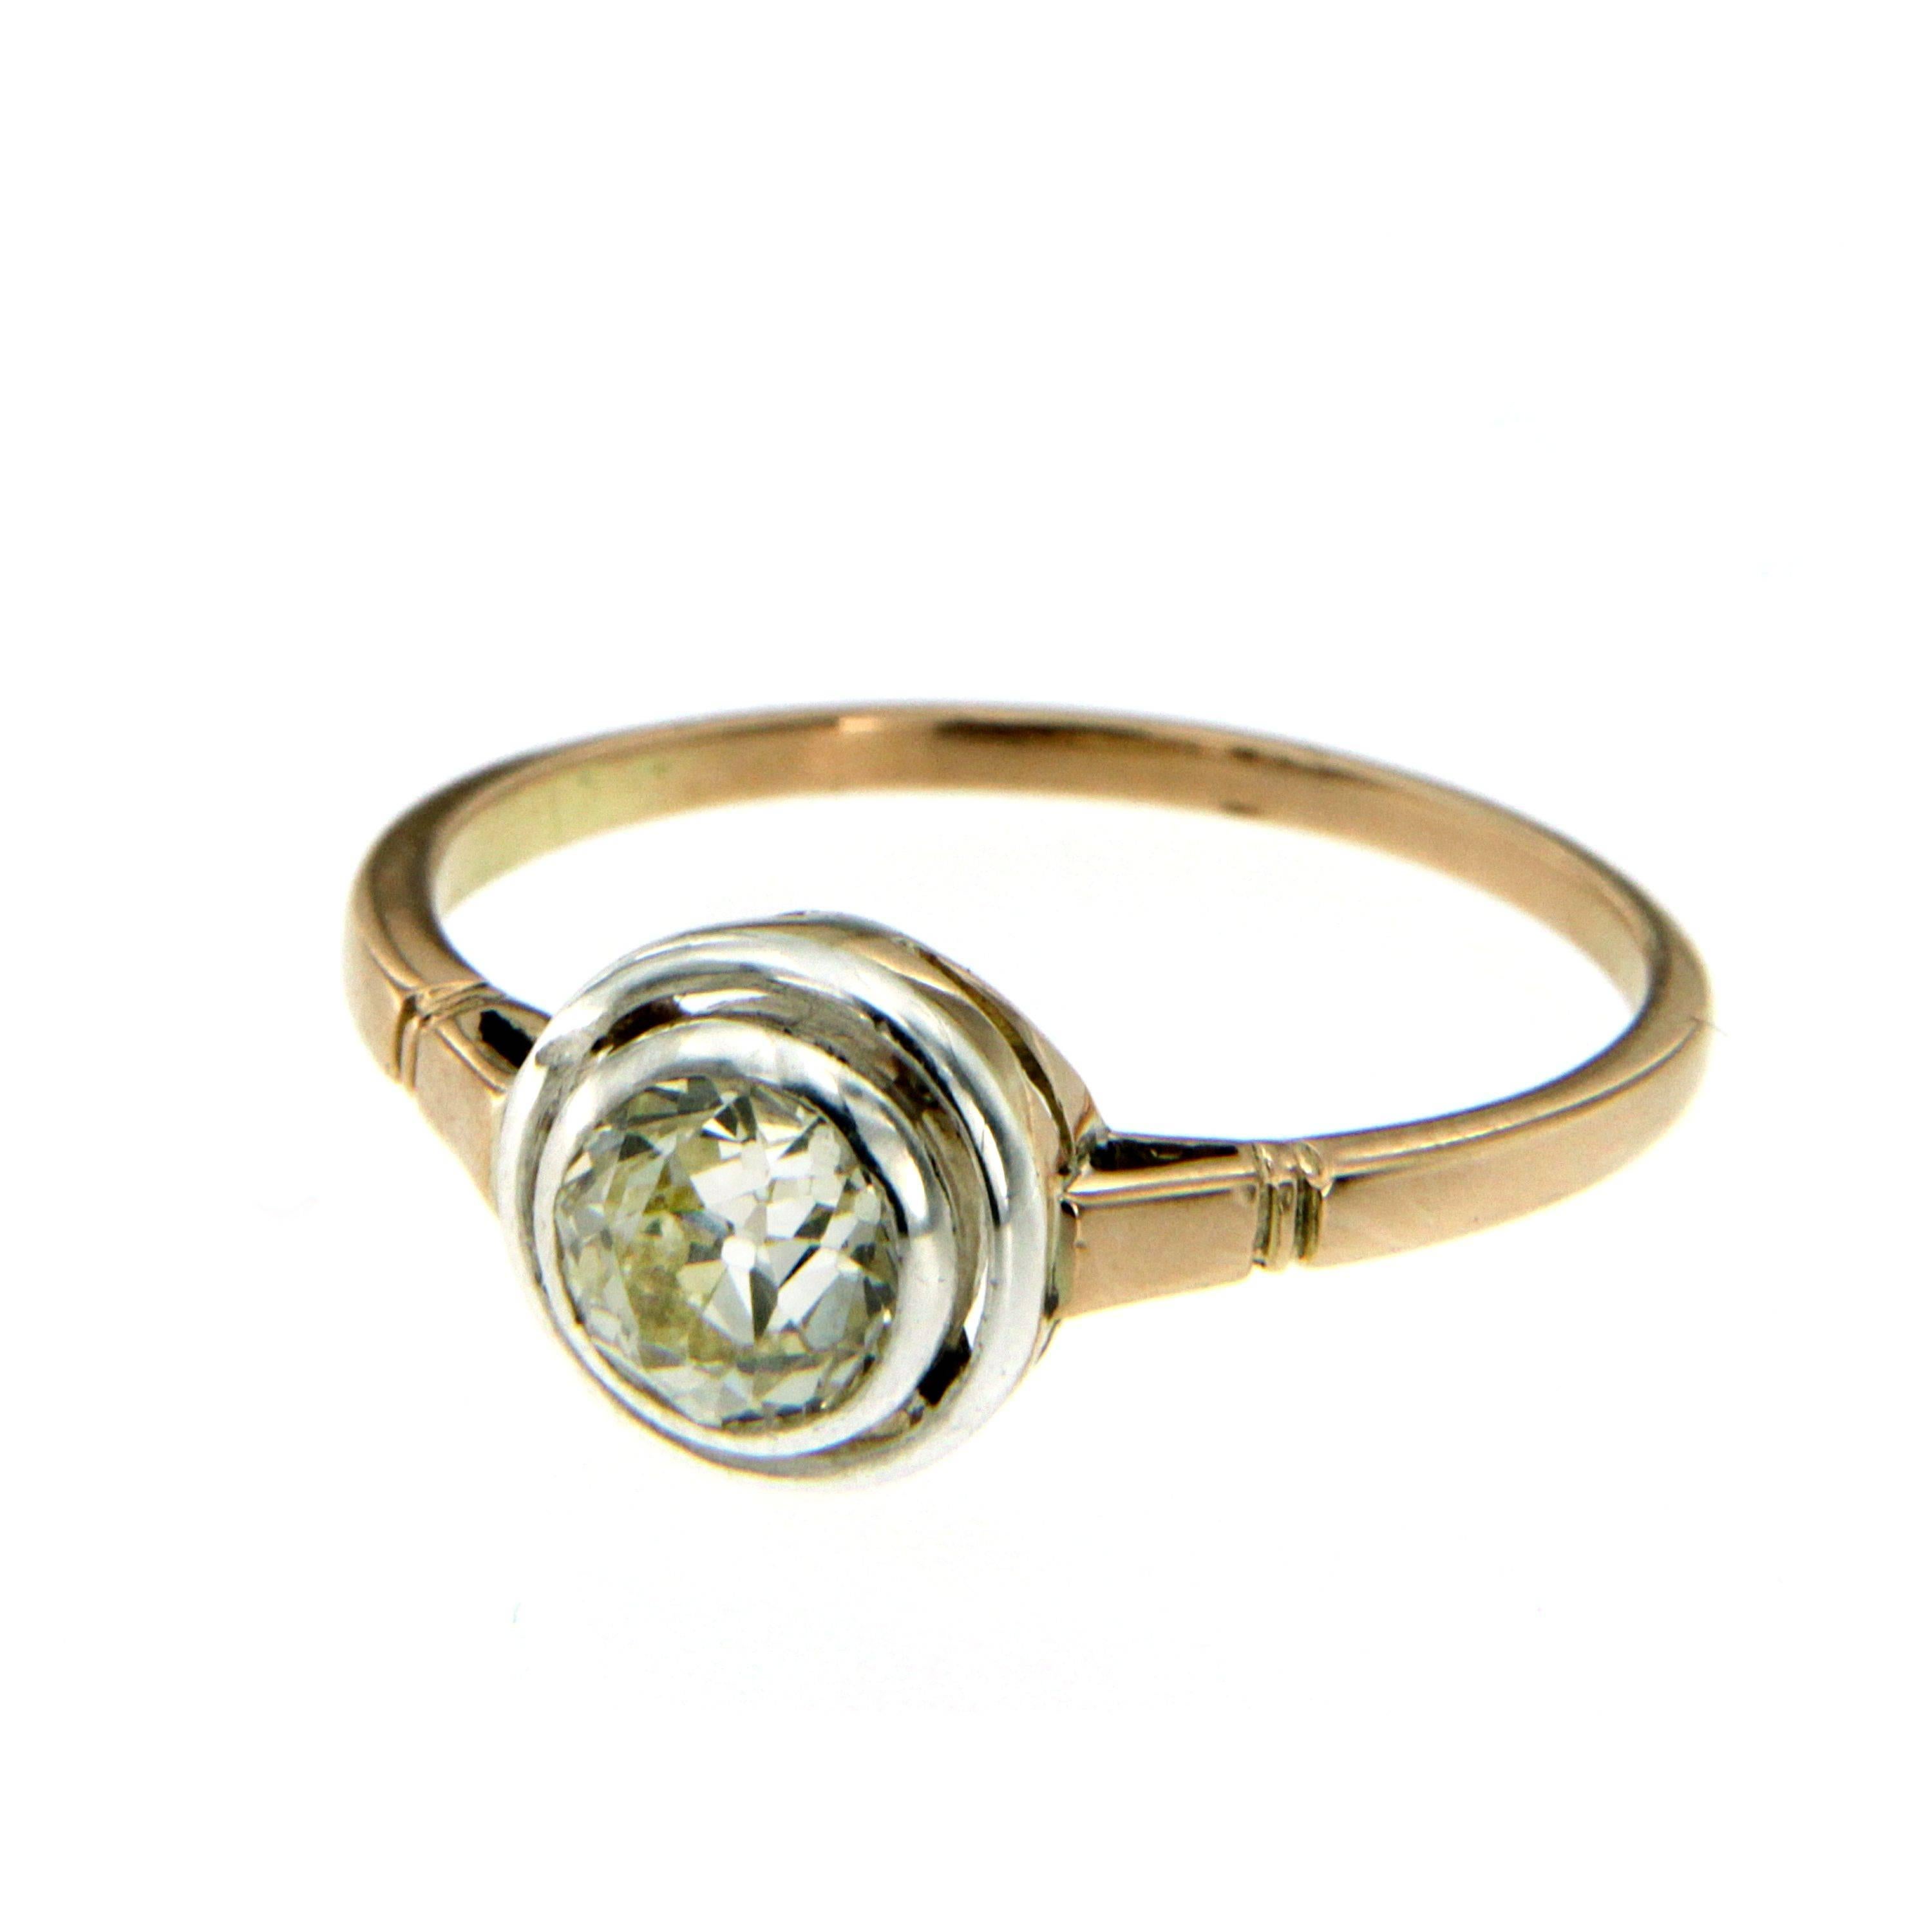 A gorgeous Edwardian solitaire ring modelled in 12k Gold and set with 1 ct eurpoean cut diamond. Circa 1910

CONDITION: Pre-Owned - Good
METAL: 12k Gold
GEM STONE: Diamond 1 carats 
DESIGN ERA: Edwardian
RING SIZE: US 7/7.5 - IT 15 - FR 55 -